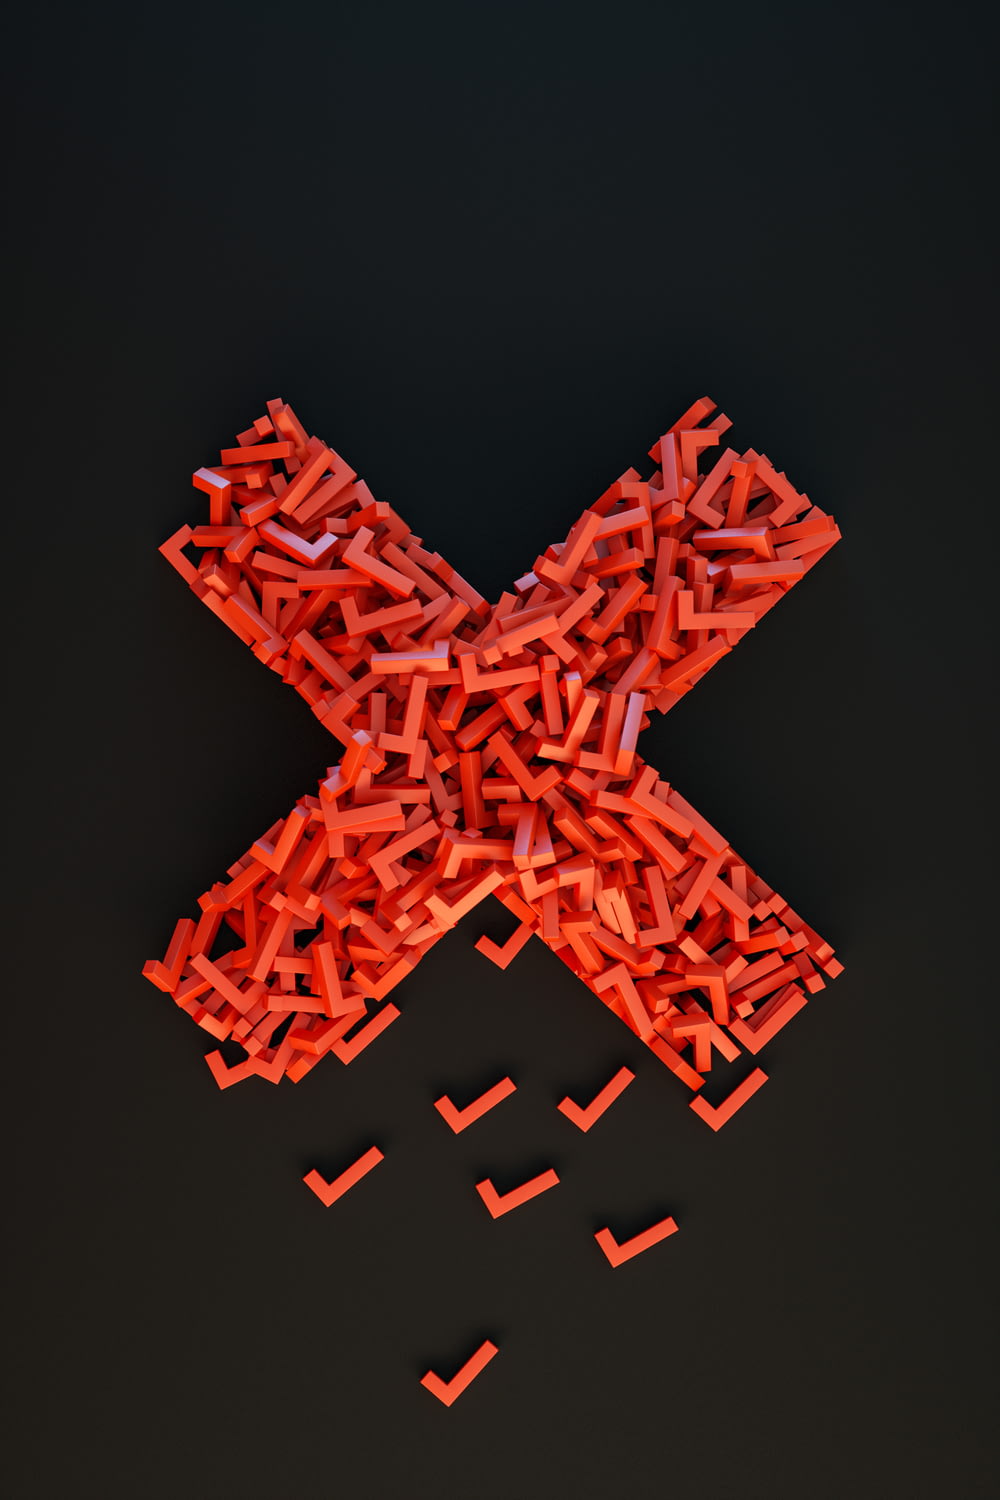 a cross made out of small pieces of red plastic